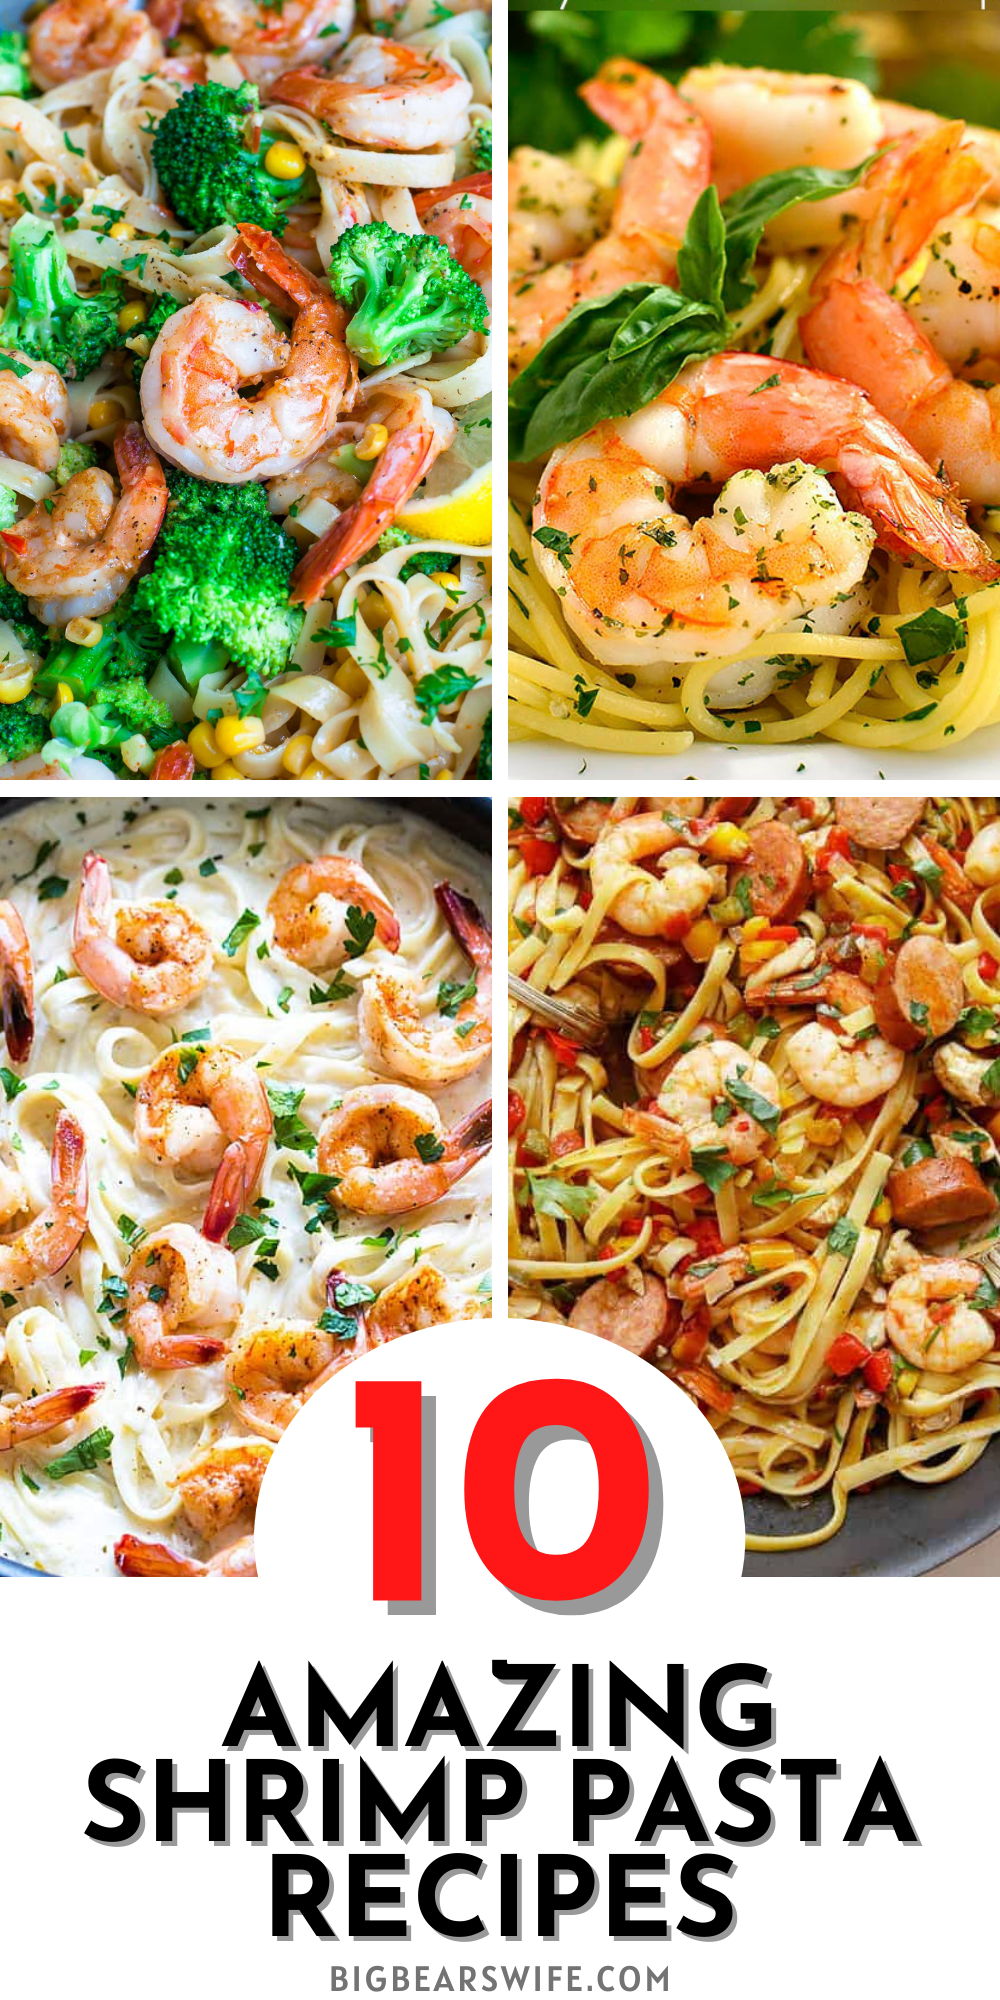 Shrimp and pasta lovers unite! There is just something wonderfully comforting about a big bowl of shrimp pasta and I've gathered up 10 of the best Shrimp Pasta Recipes for you to try! There is shrimp Alfredo, butter shrimp, shrimp stuffed shells and more!   via @bigbearswife